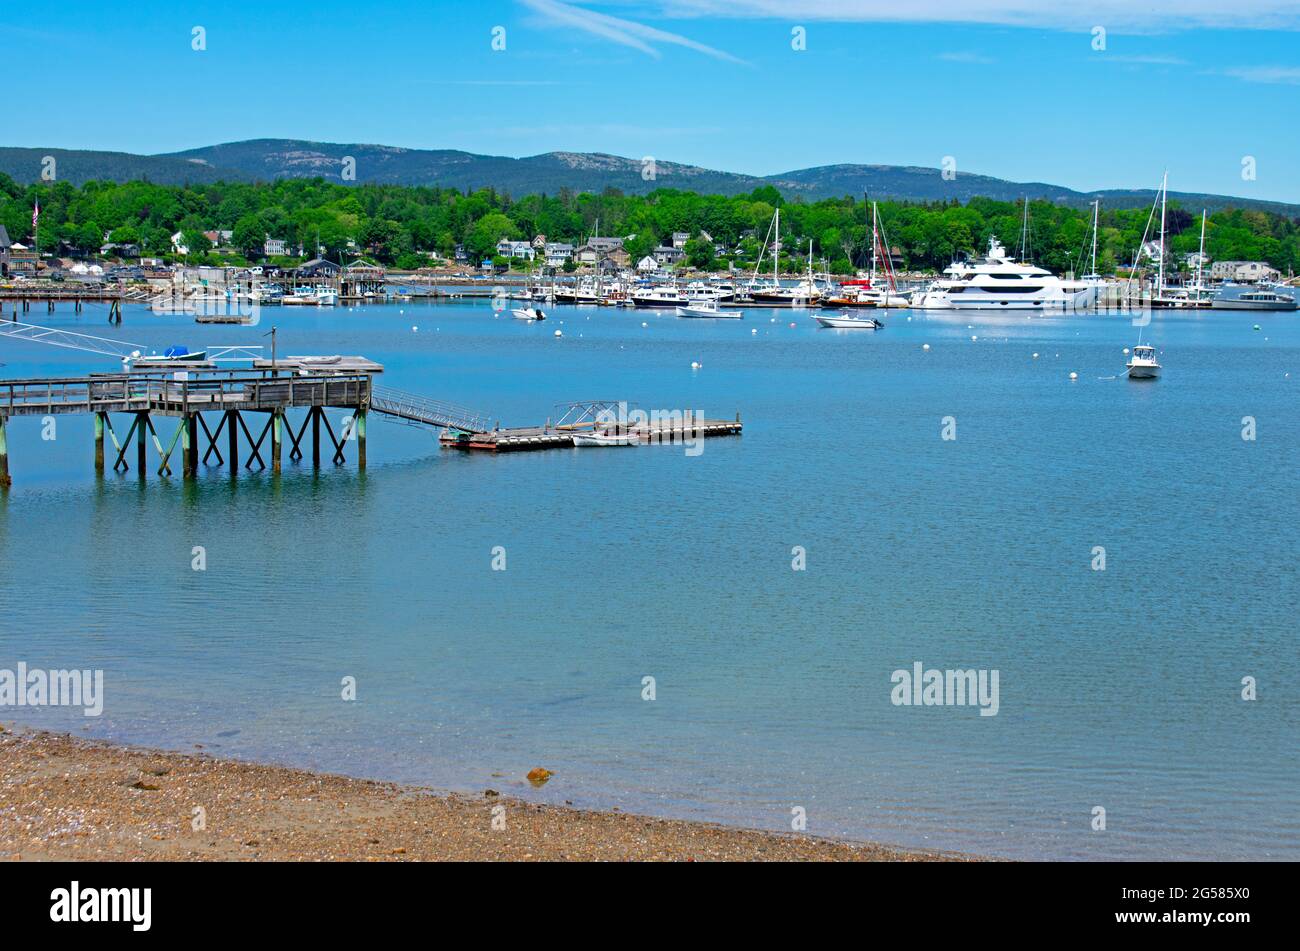 Variety of nautical vessels moored on calm blue waters of a Maine harbor under a blue sky with some cirrus clouds -05 Stock Photo